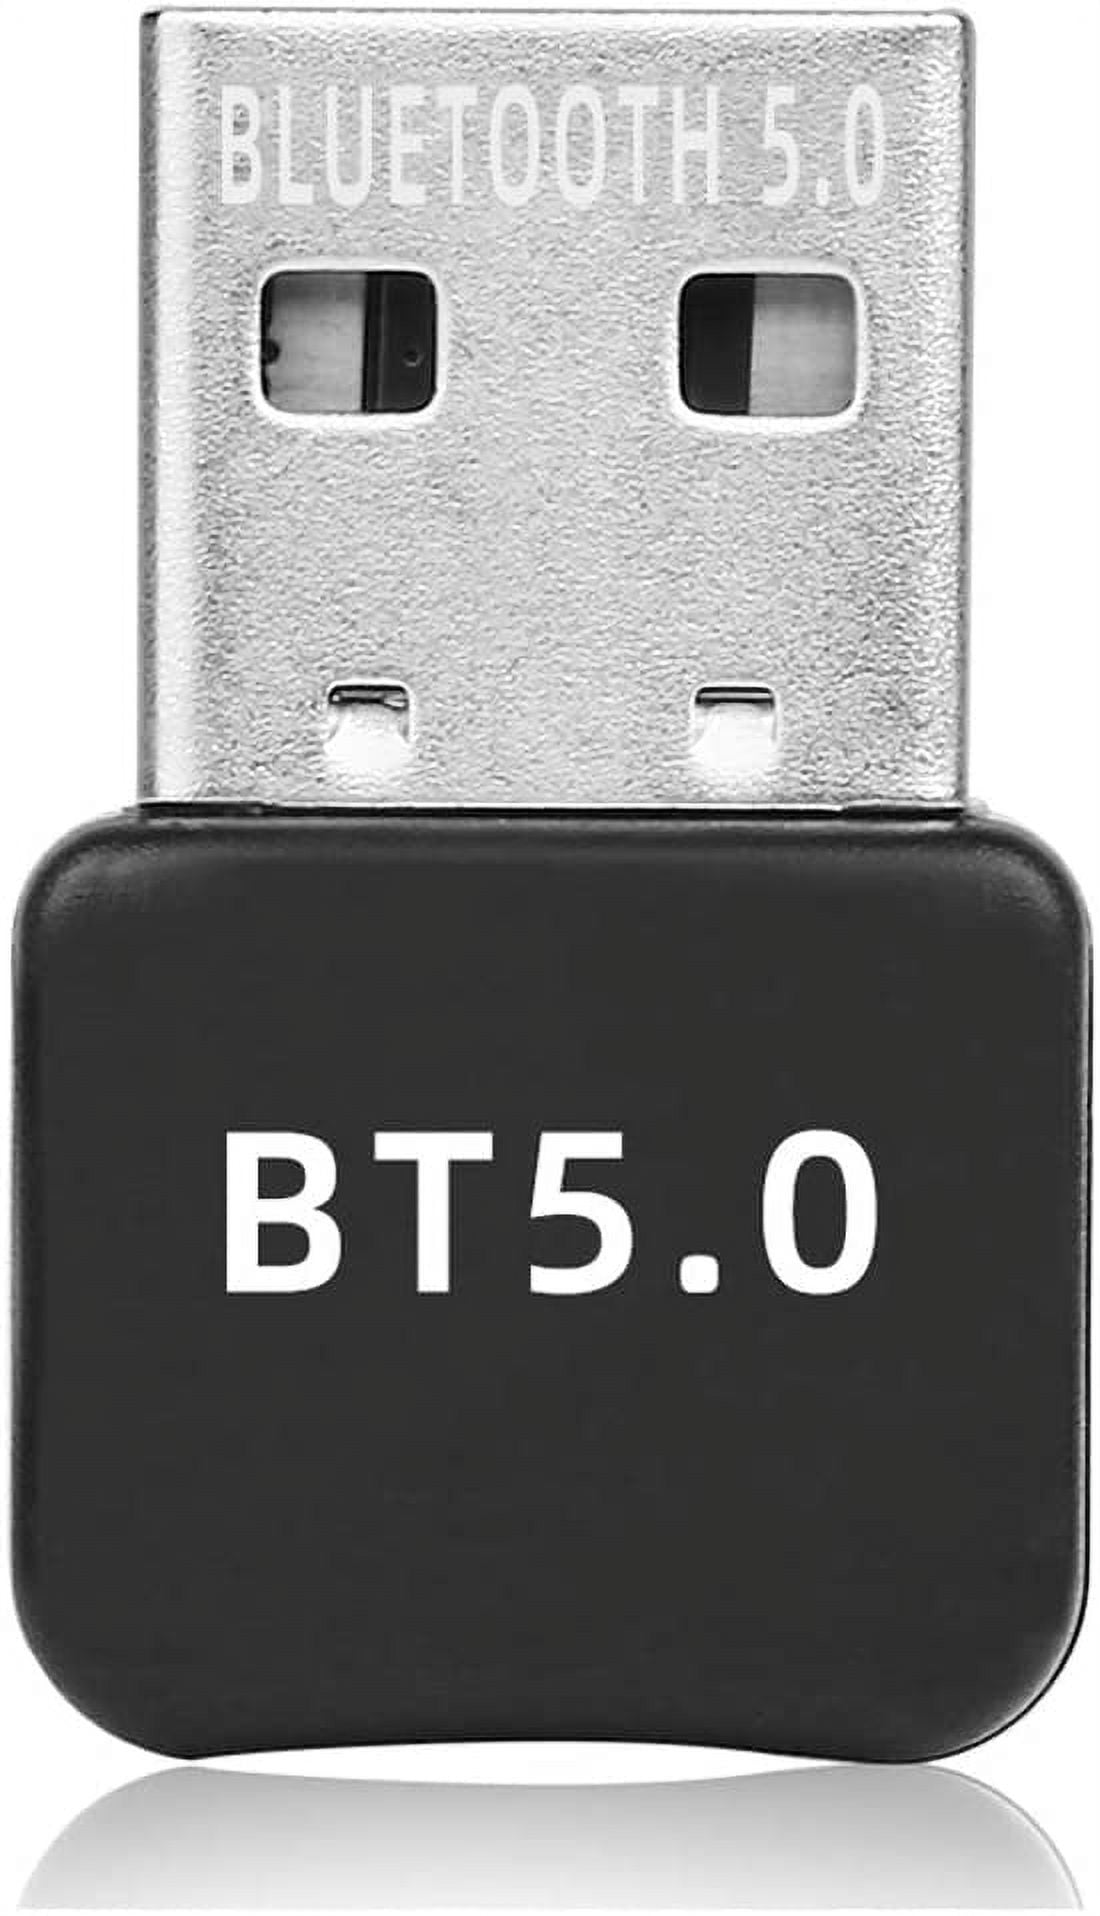 Usb Bluetooth Dongle Bluetooth 5.0 Mini Usb Dongle Adapter With Low Power  Consumption Plug And Play (Bluetooth 5.0)